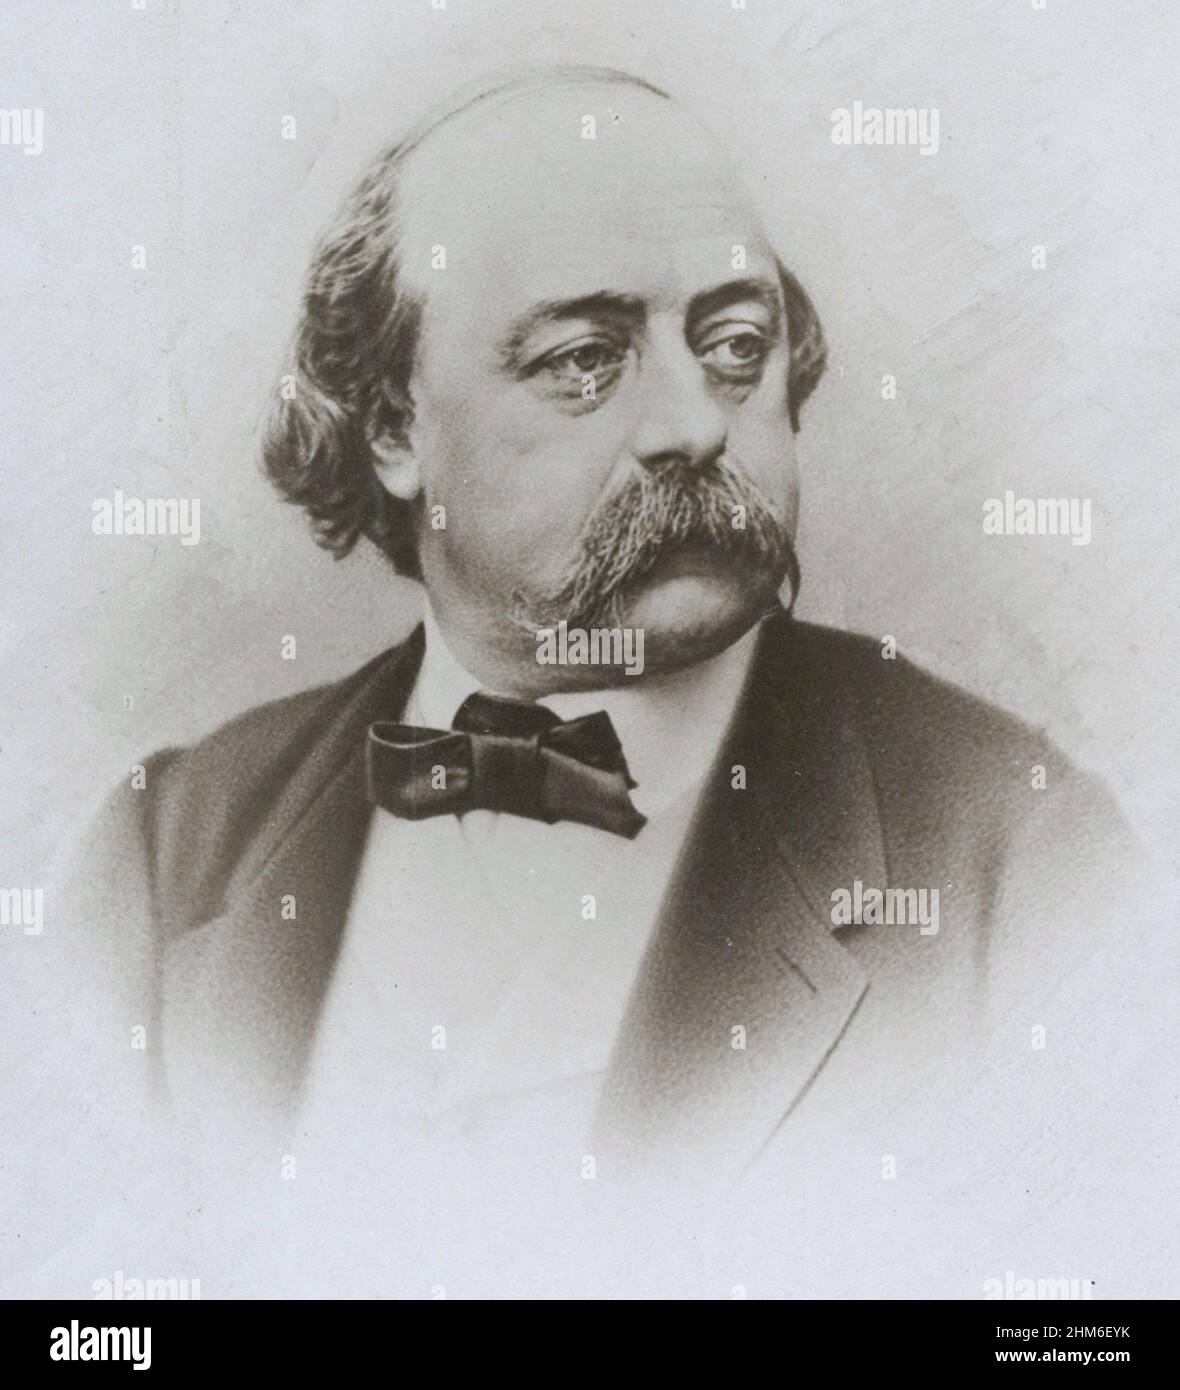 A portrait of the French writer Gustave Flaubert, author of Madame Bovary, from 1865 when he was 44 yrs old. Stock Photo